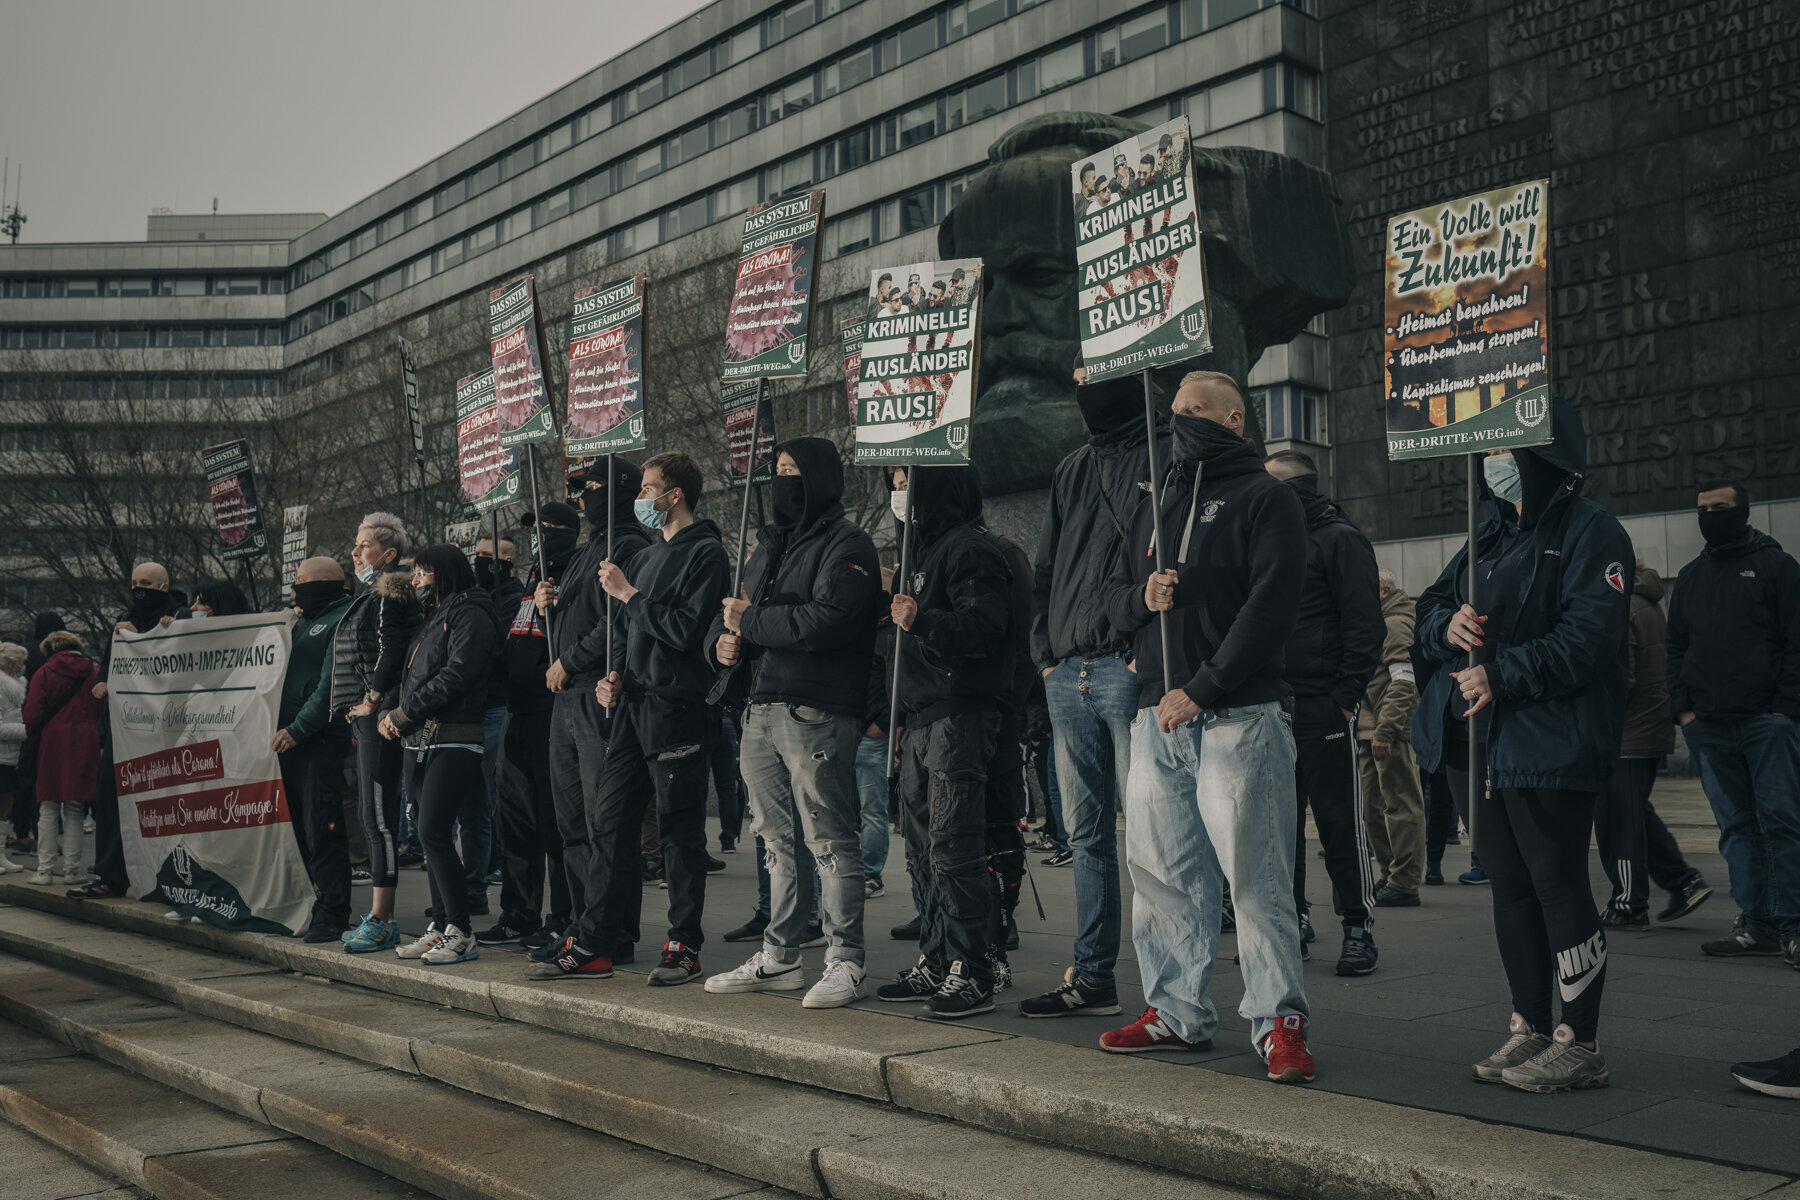  Neo-Nazis demonstrate against the measures to contain the pandemic in Chemnitz. During the Corona crisis, extremist right-wing movements in Germany receive a lot of growth from different parts of the society.  